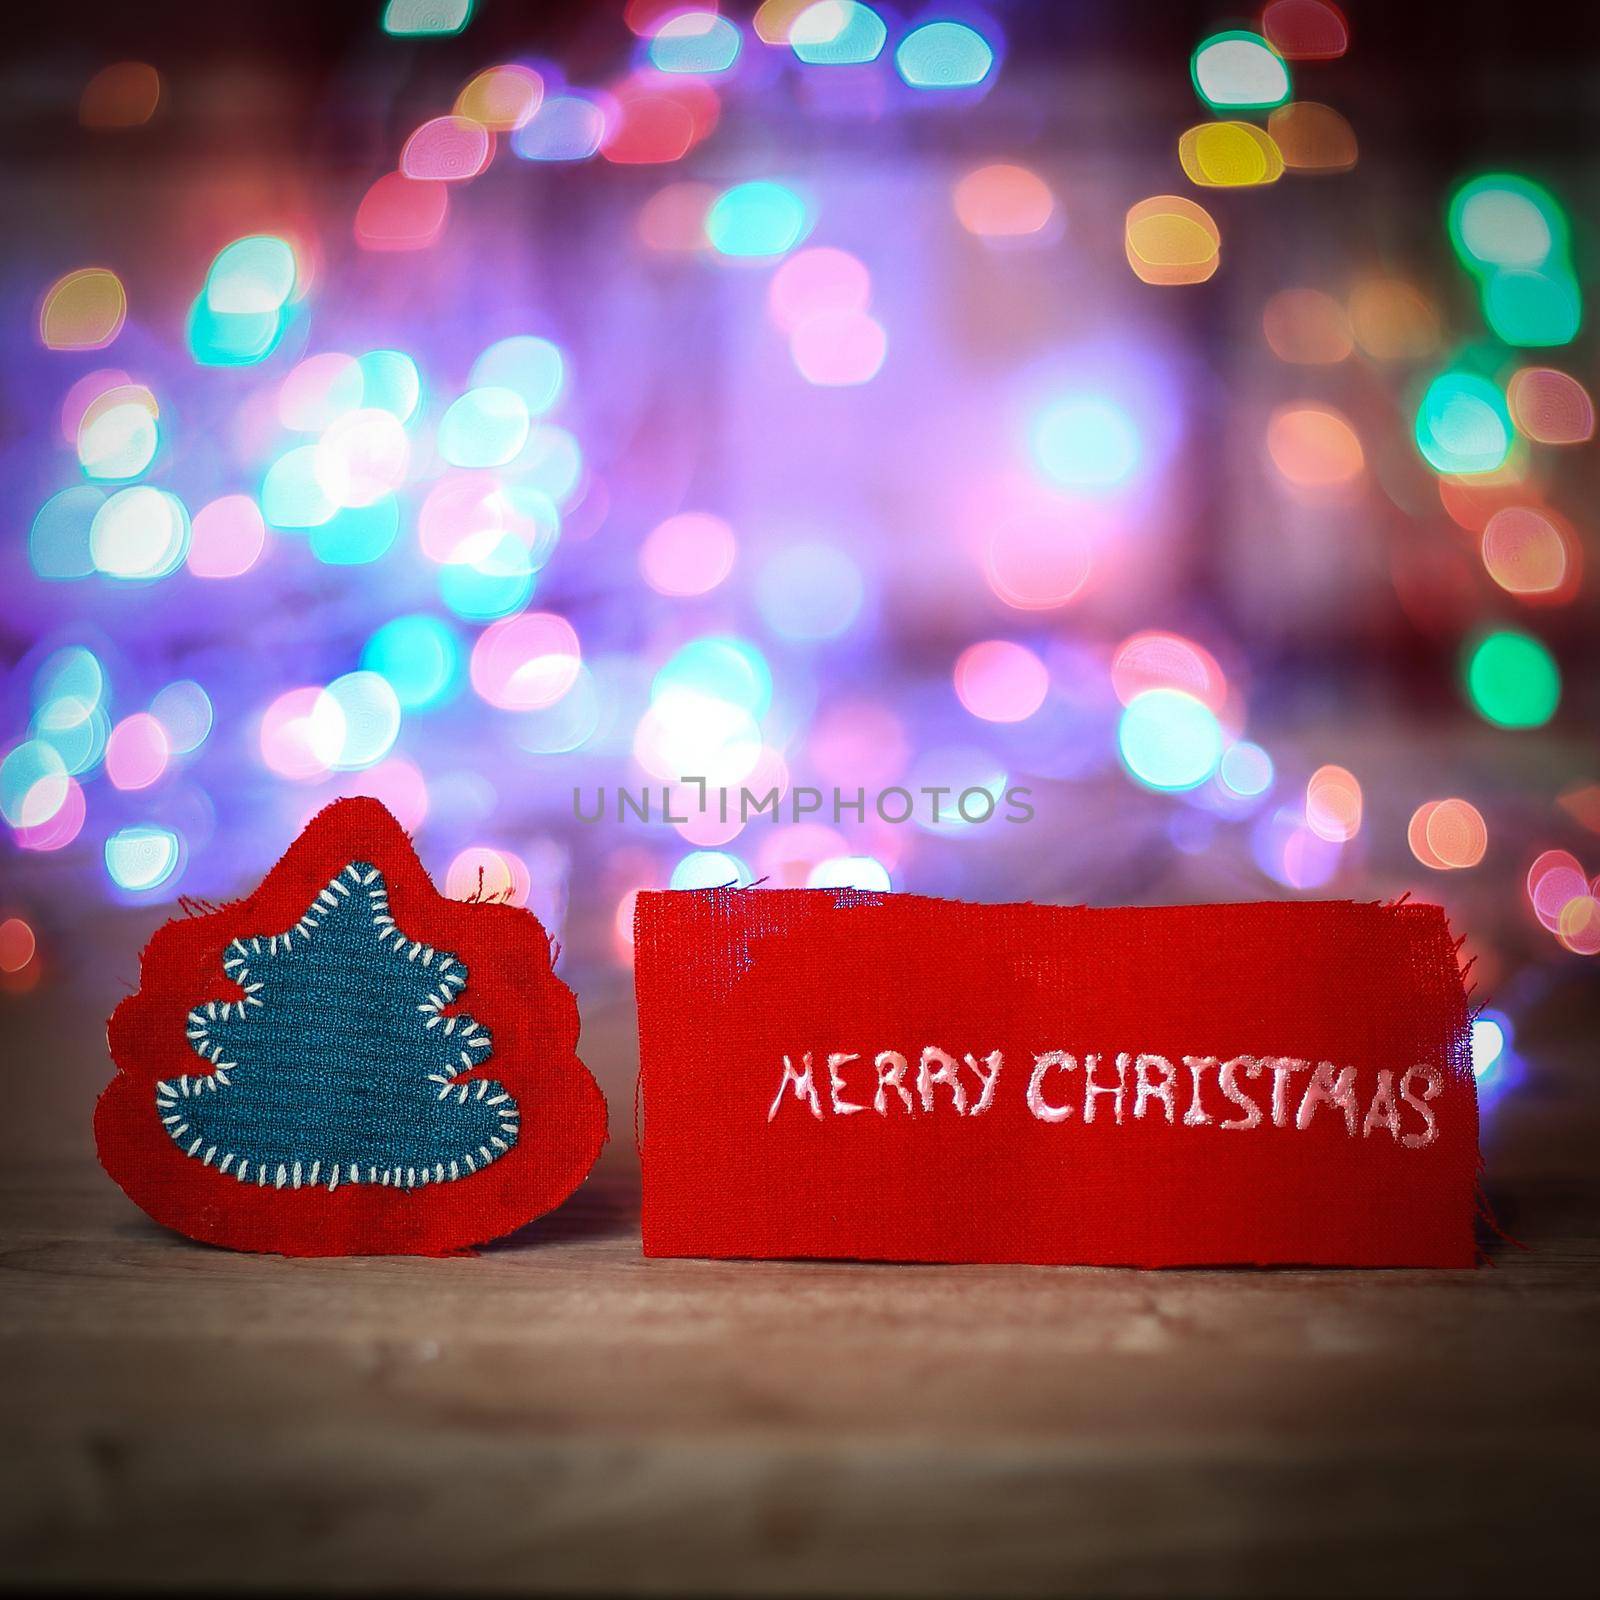 inscription merry Christmas on a festive blurred background .photo with copy space.